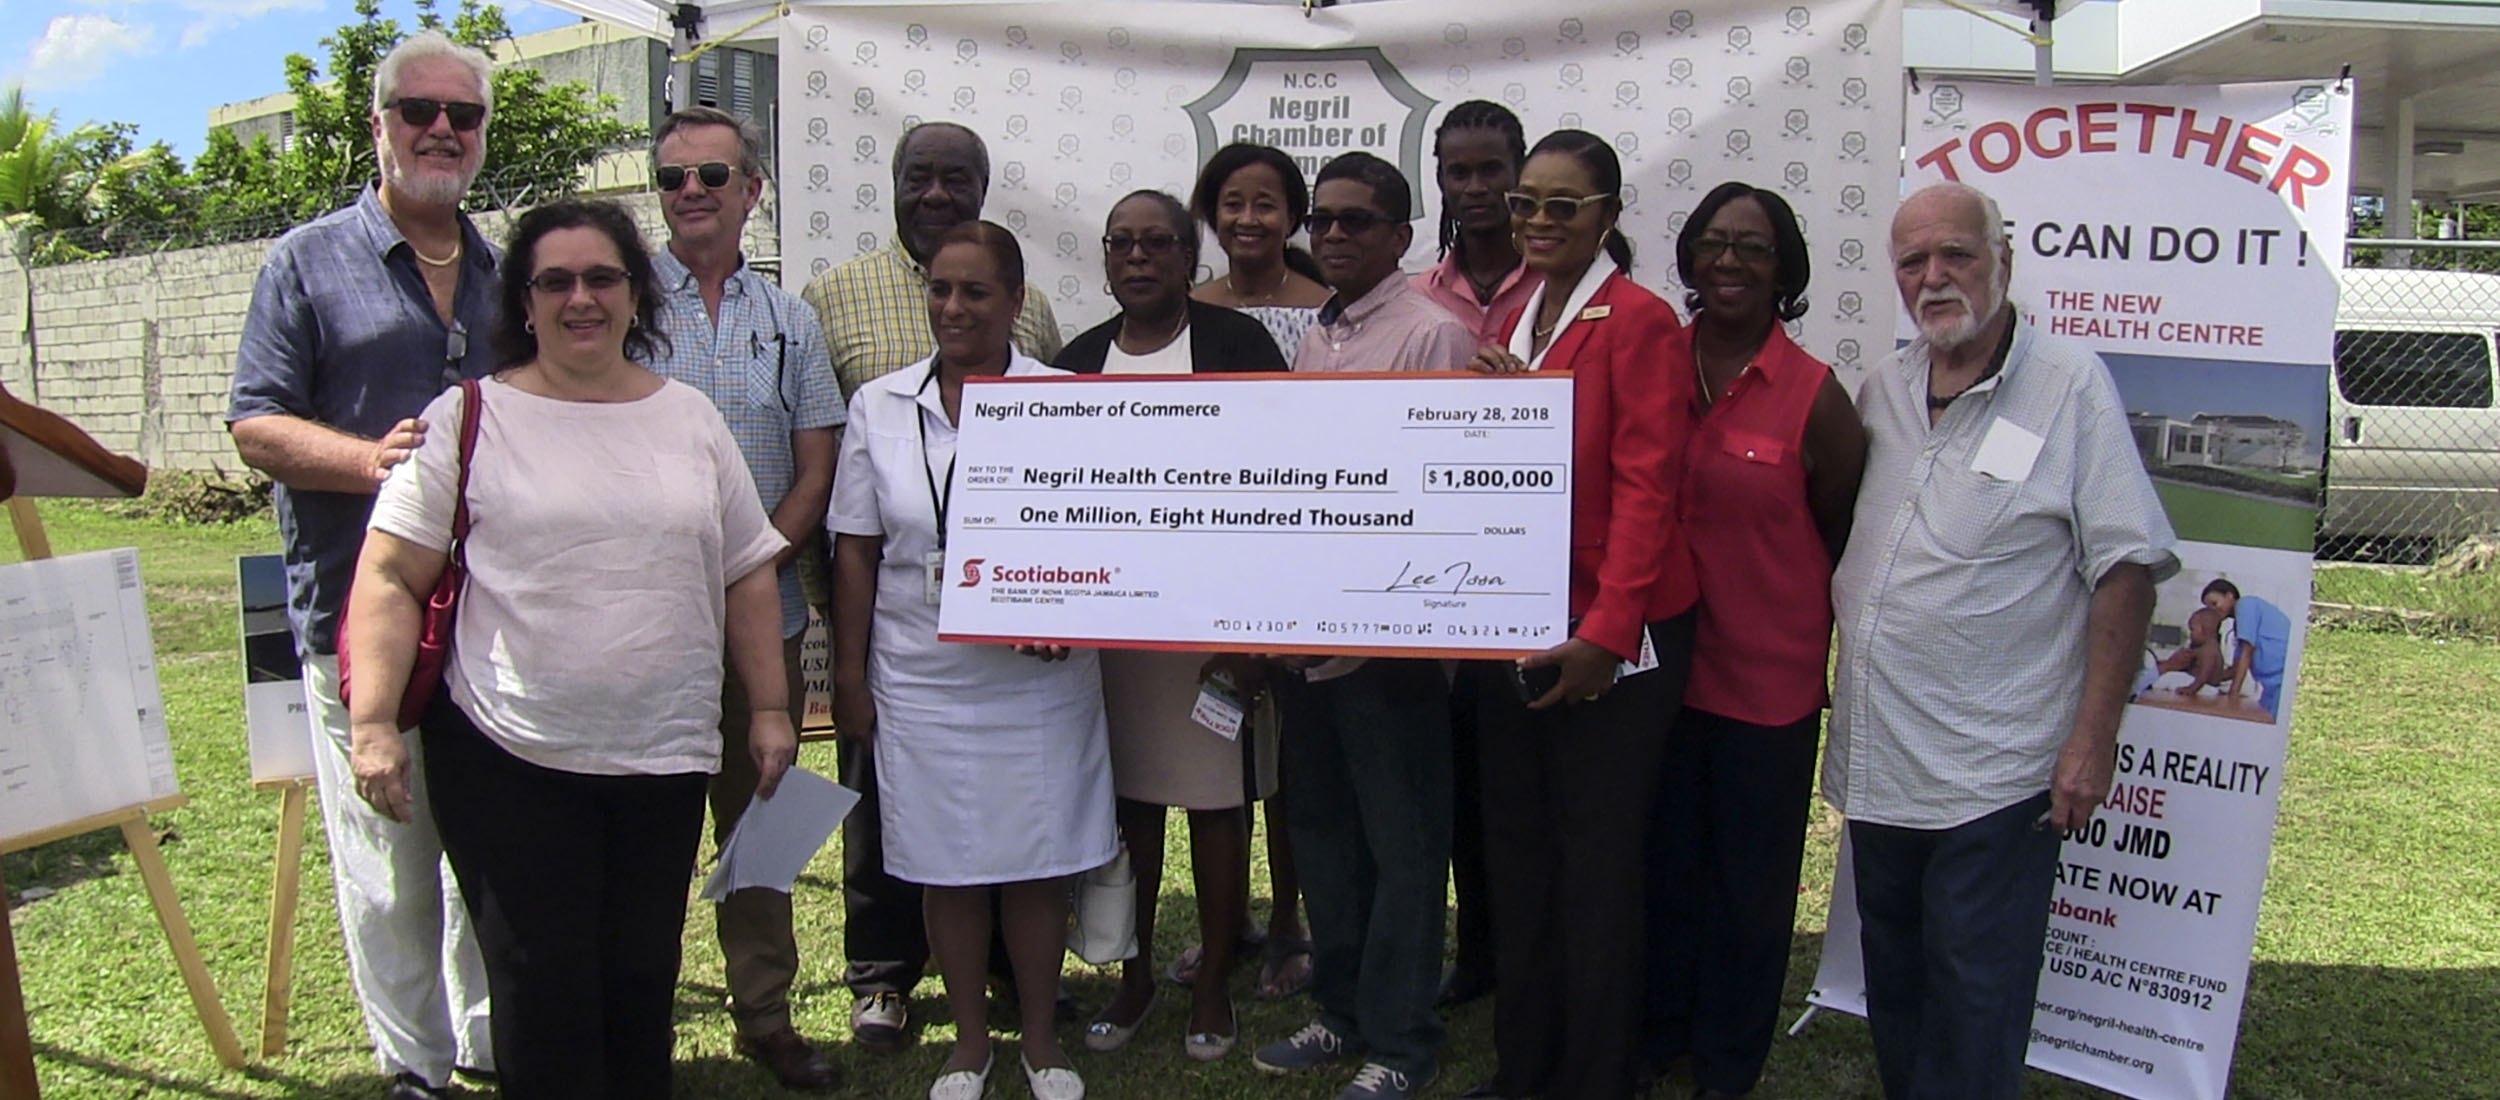 Negril Chamber of Commerce presents $1.8 million check to Negril Health Centre Fund